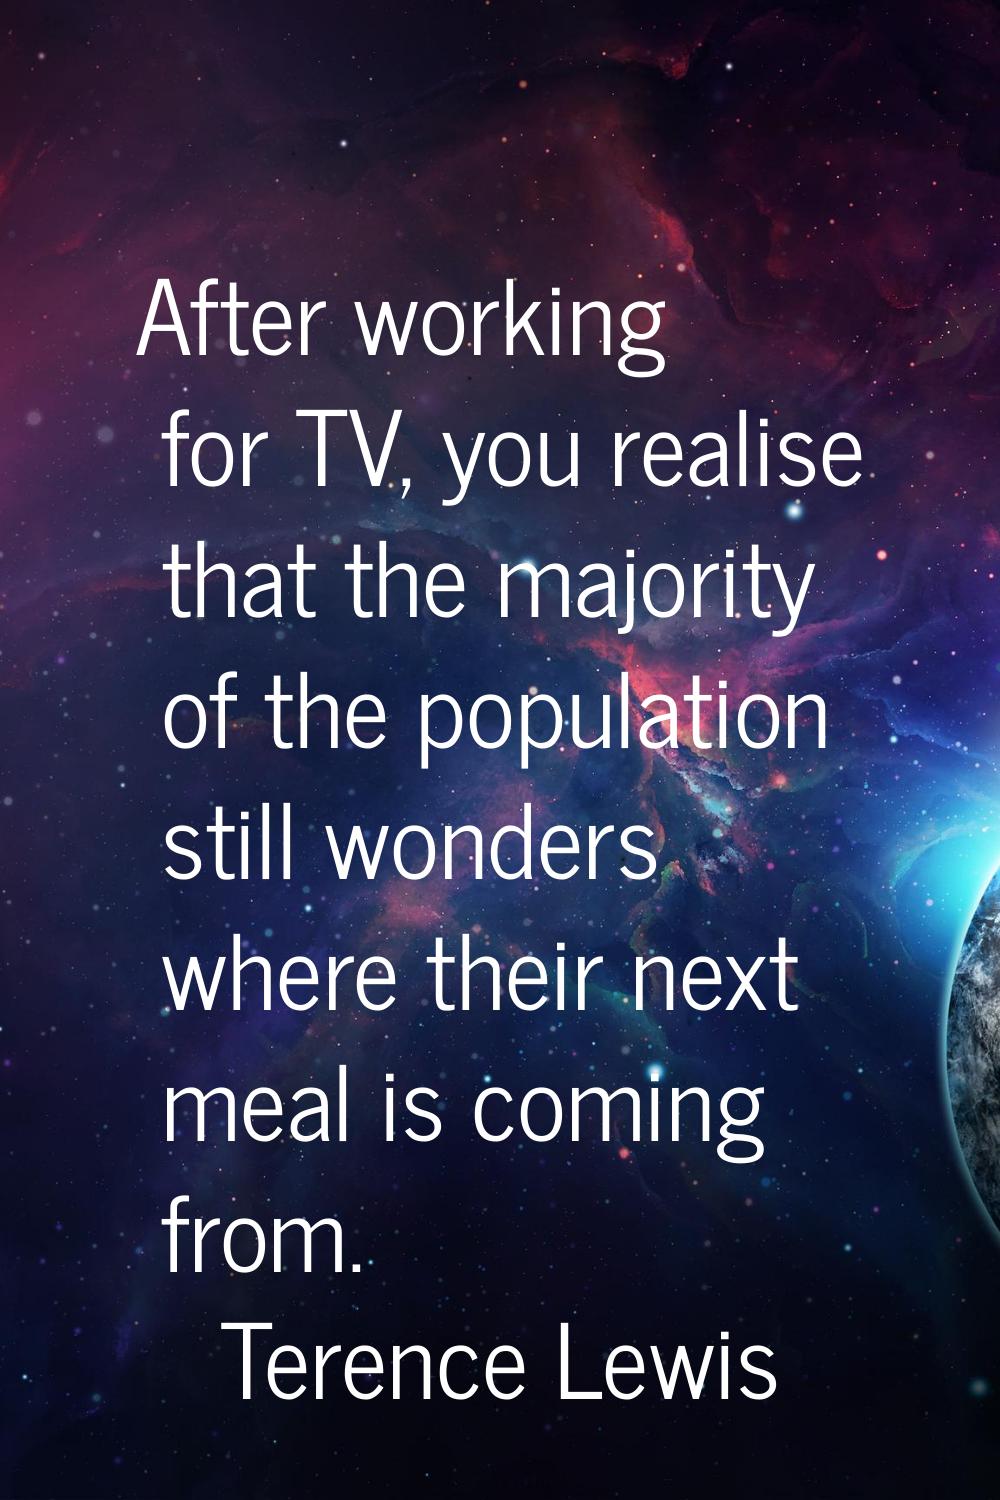 After working for TV, you realise that the majority of the population still wonders where their nex